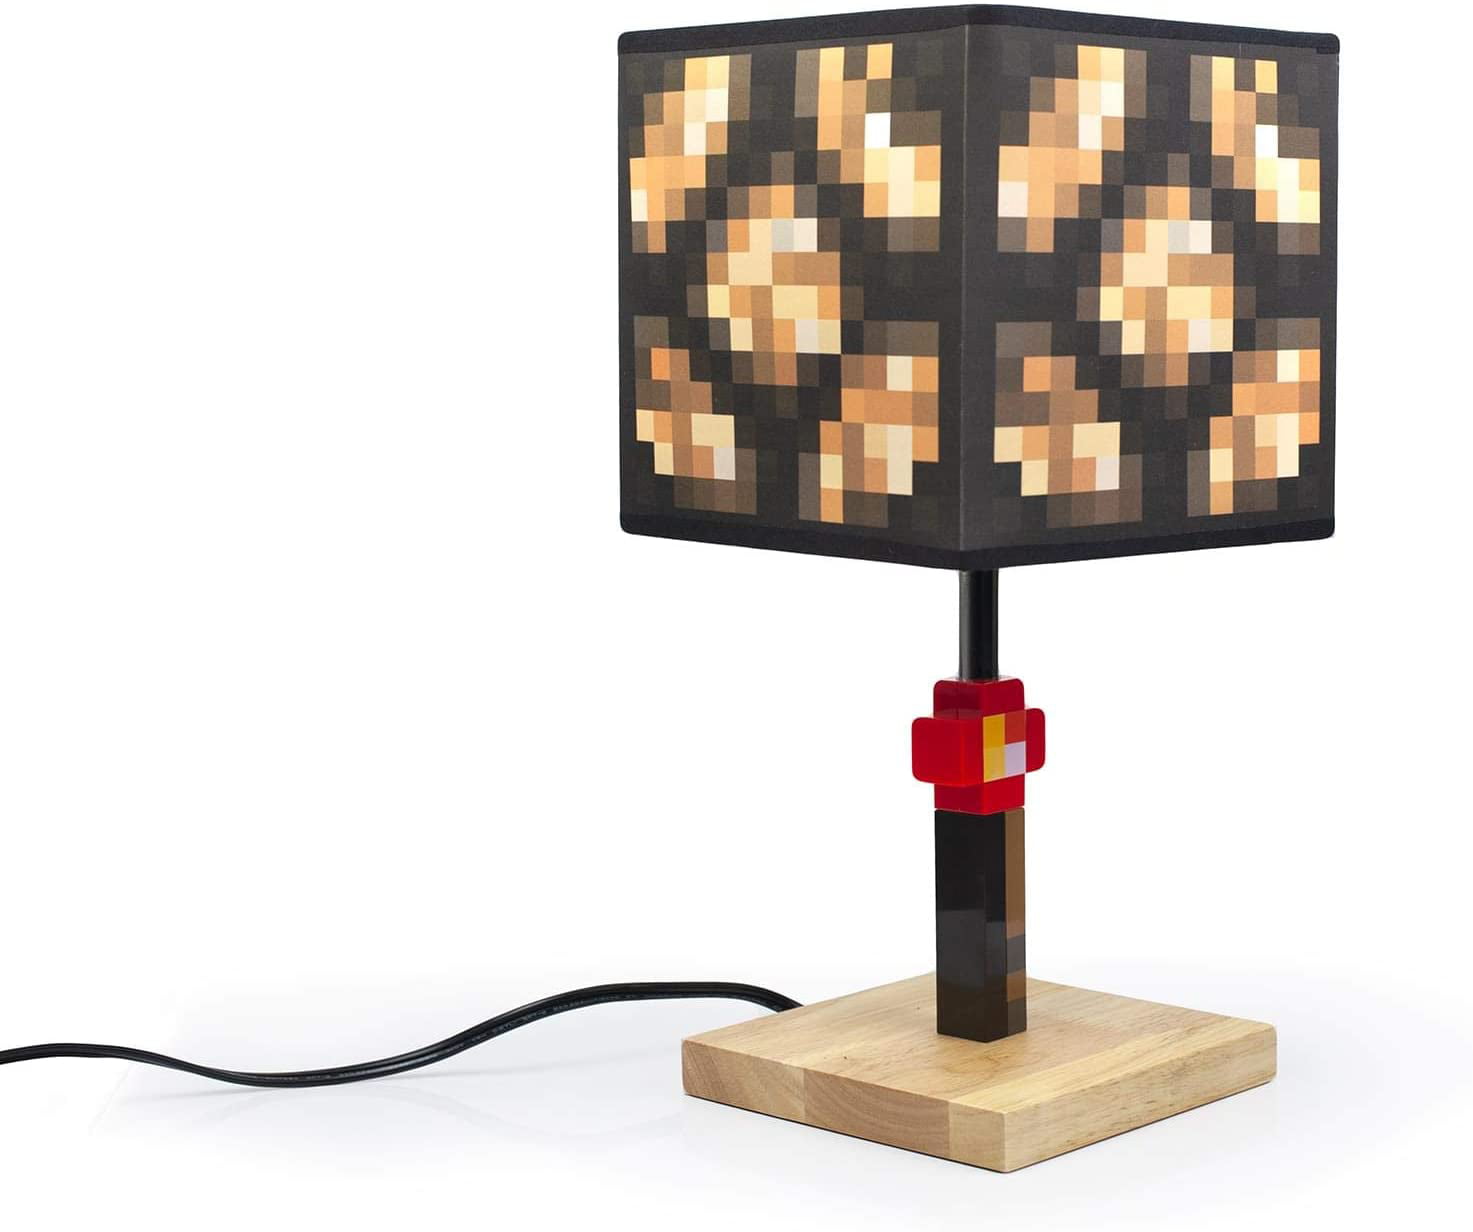 PIXELS FACE DRUM LIGHTSHADE & TOUCH LAMP SET KIDS FREE P+P and FREE GIFT 